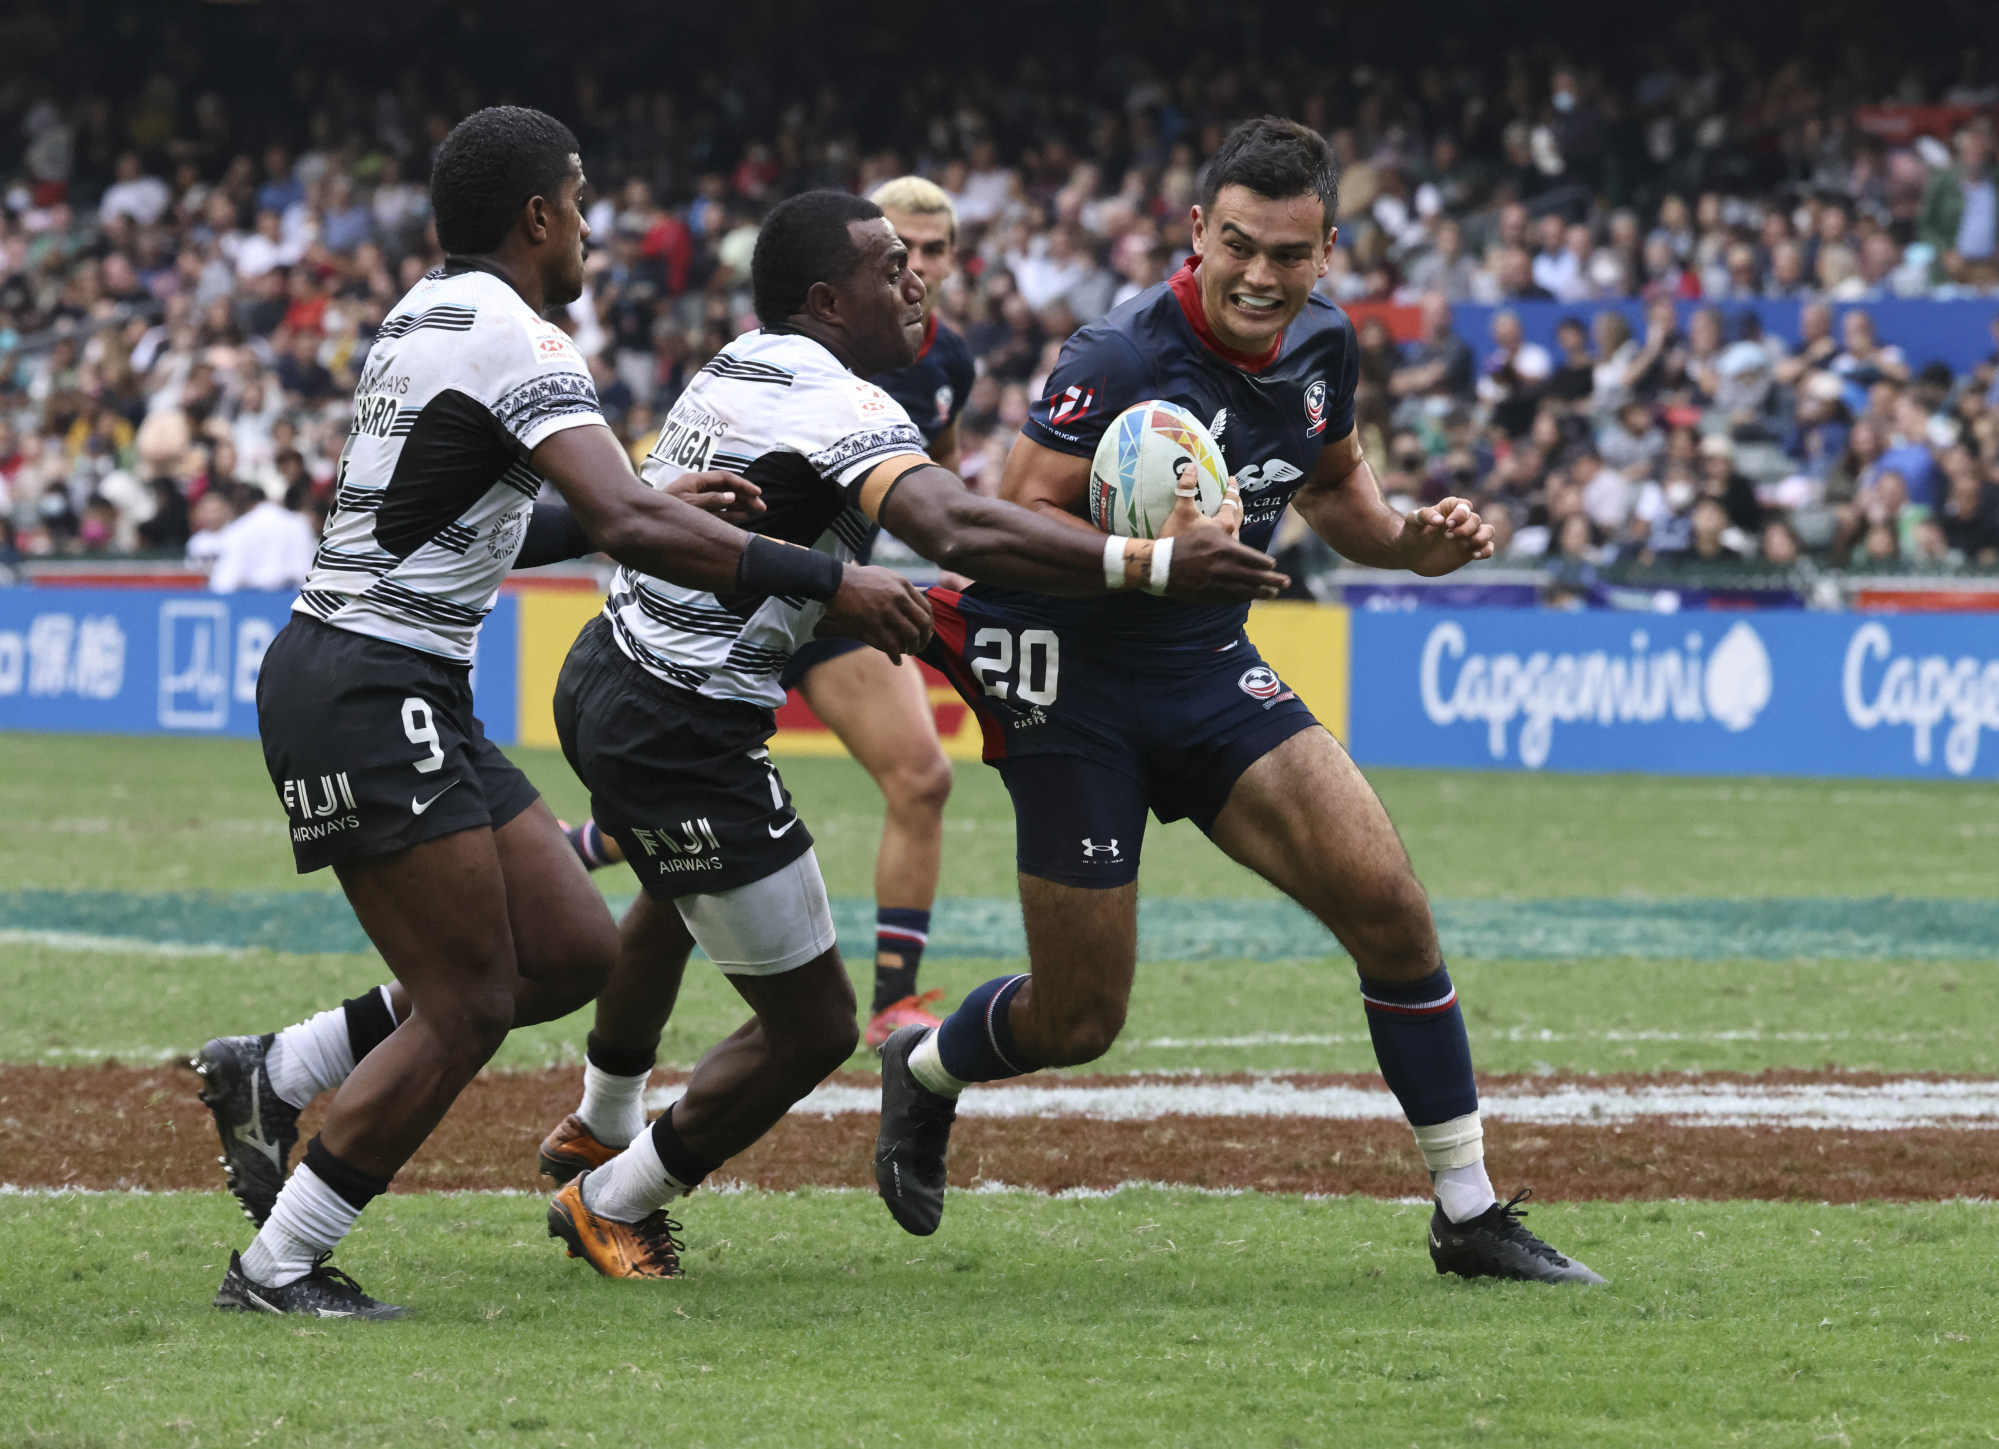 Hong Kong Sevens 2022 results, fixtures, kick-off times, TV details, tickets and all you need to know on day 3 South China Morning Post